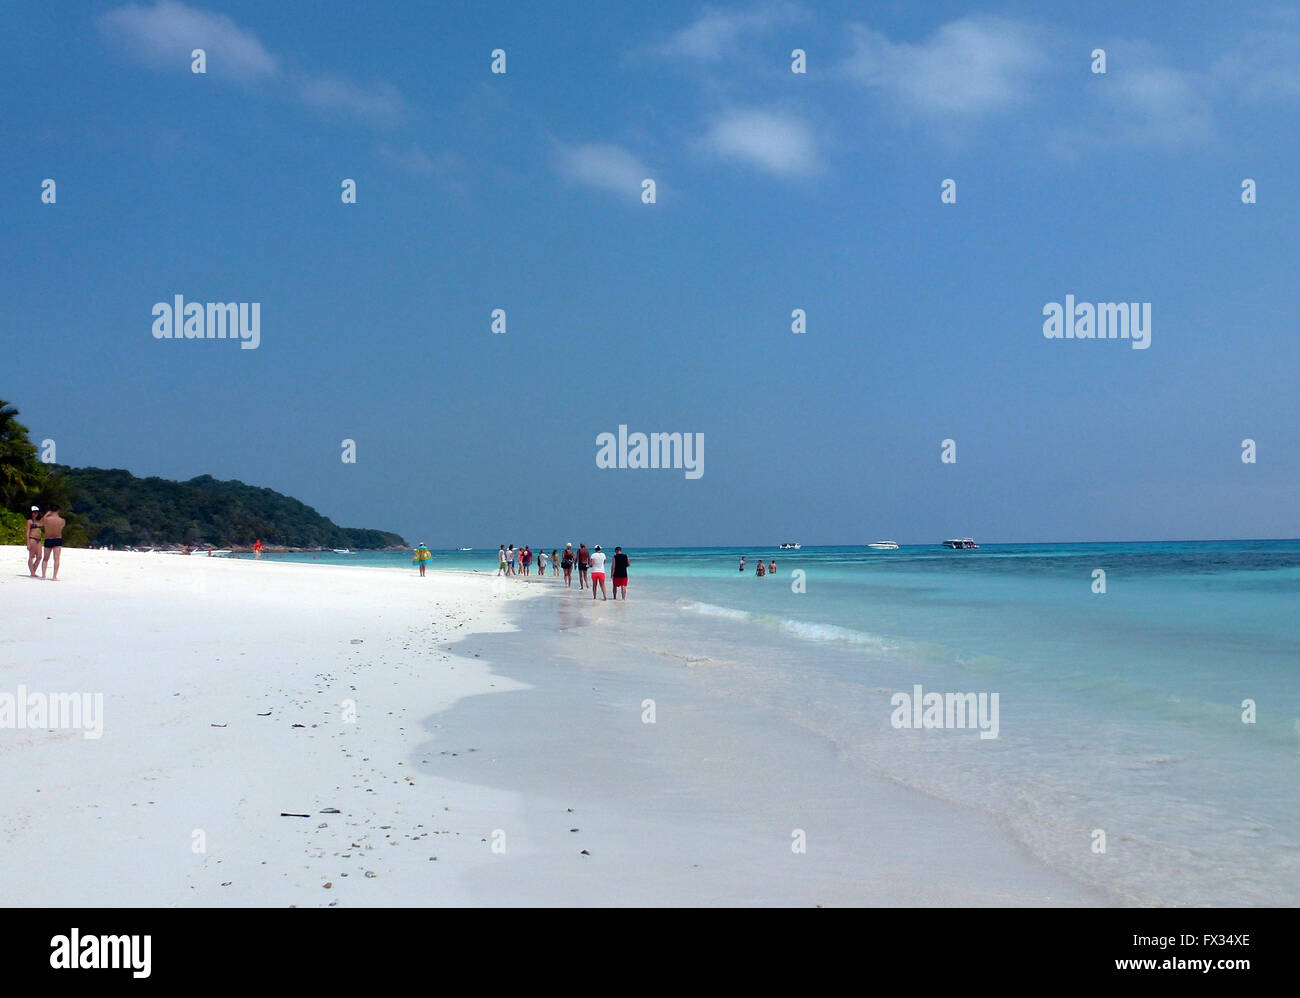 Tourists walk along the beach on Koh Tachai island, Thailand, 15 March 2016. Koh Tachai is located outside of the actual Similan Islands and is the northernmost part of the national park of the same name. Photo: ALEXANDRA SCHULER/dpa - NO WIRE SERVICE - Stock Photo